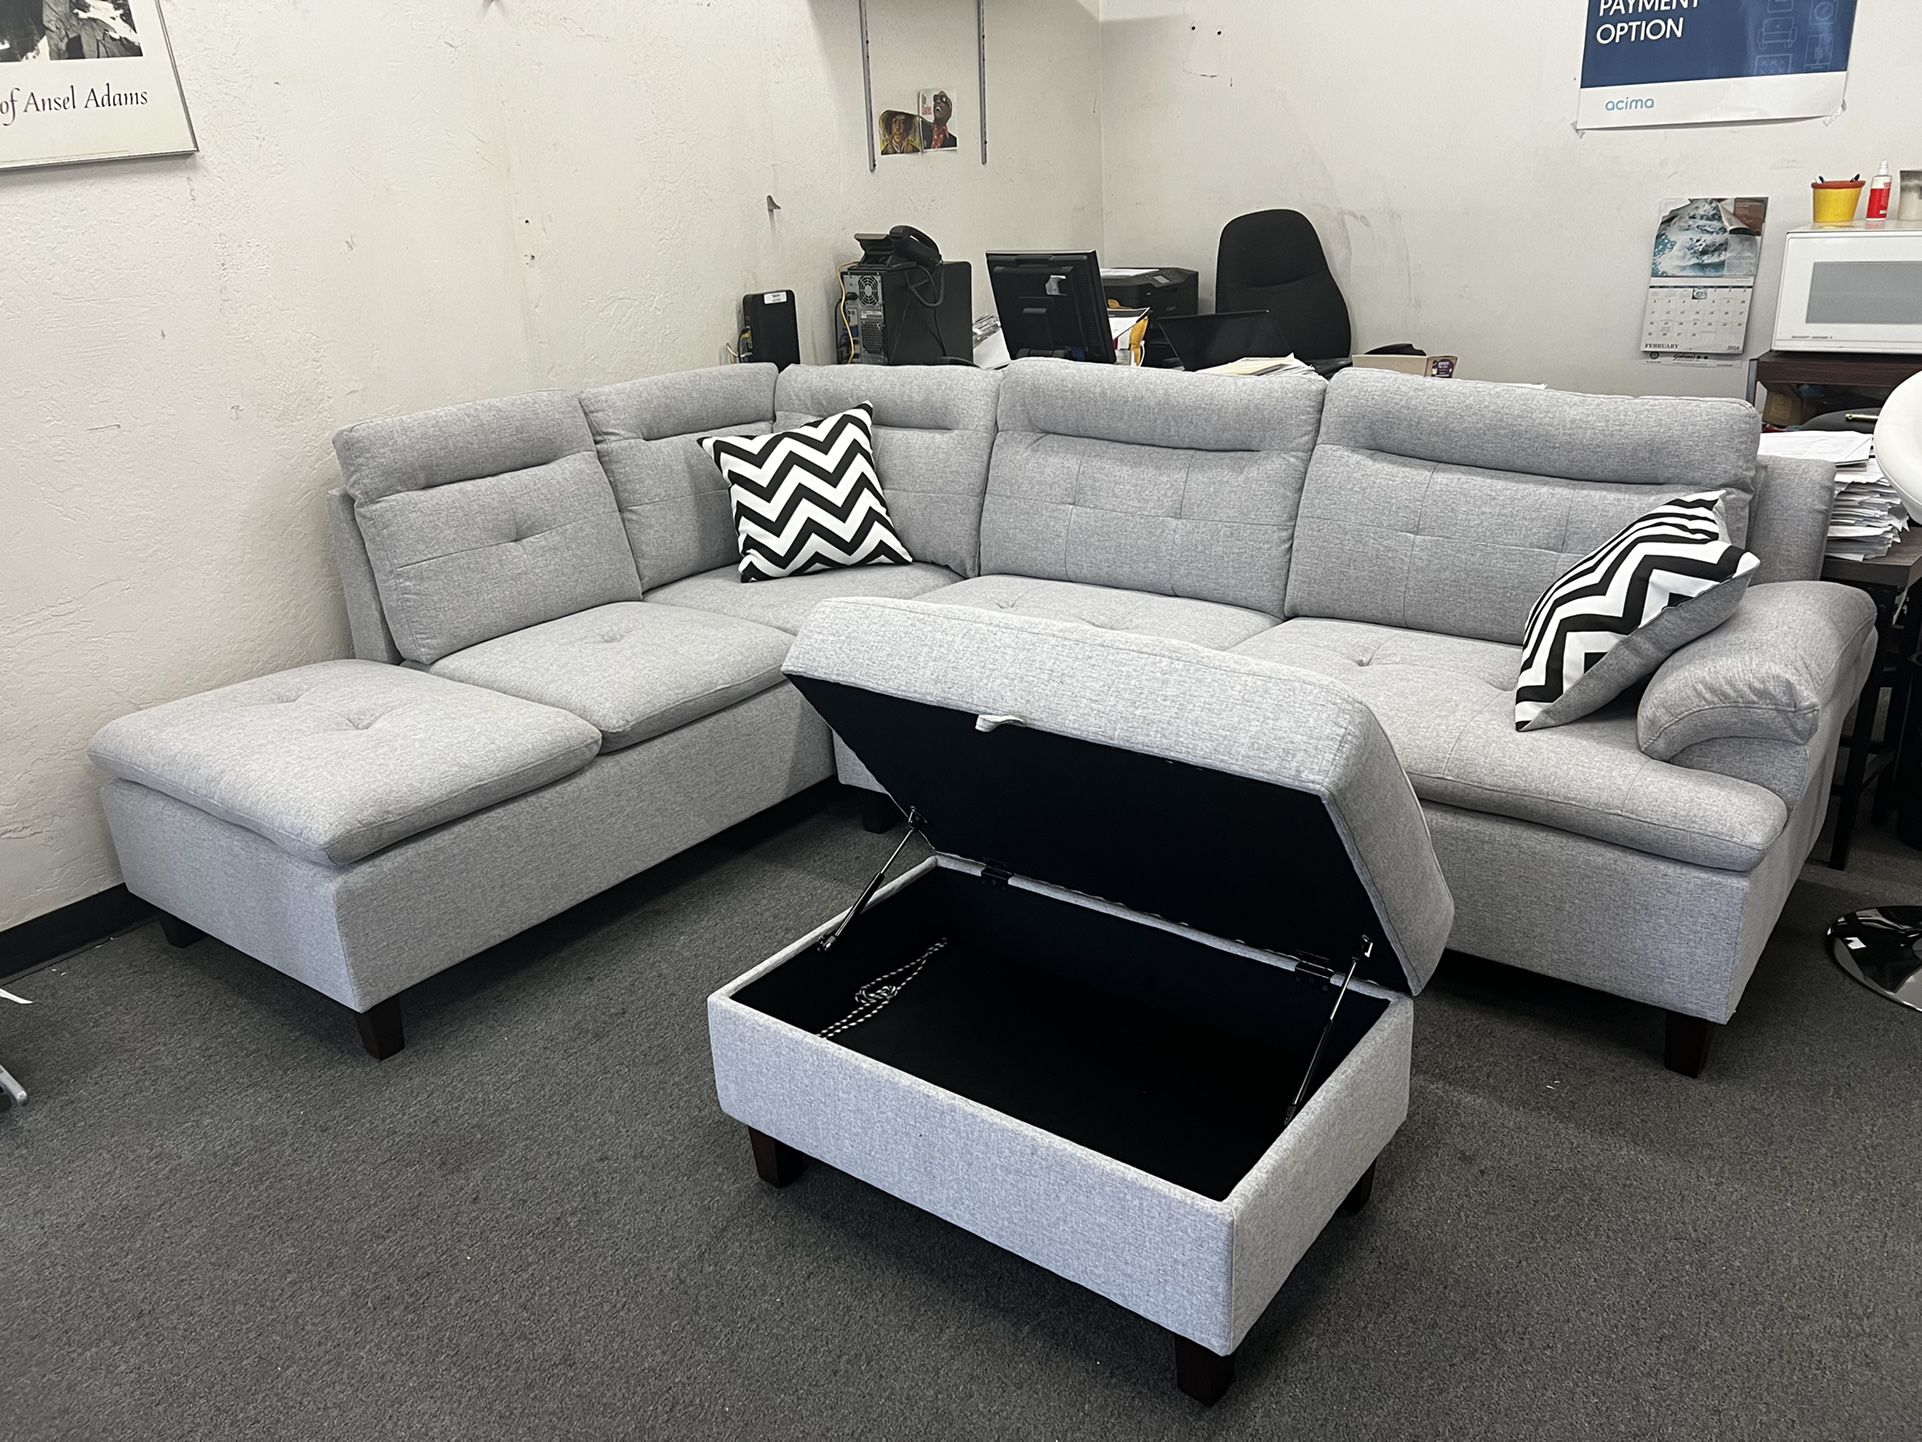 New Gray Sectional Couch ! Free Delivery !! Financing Available ! 